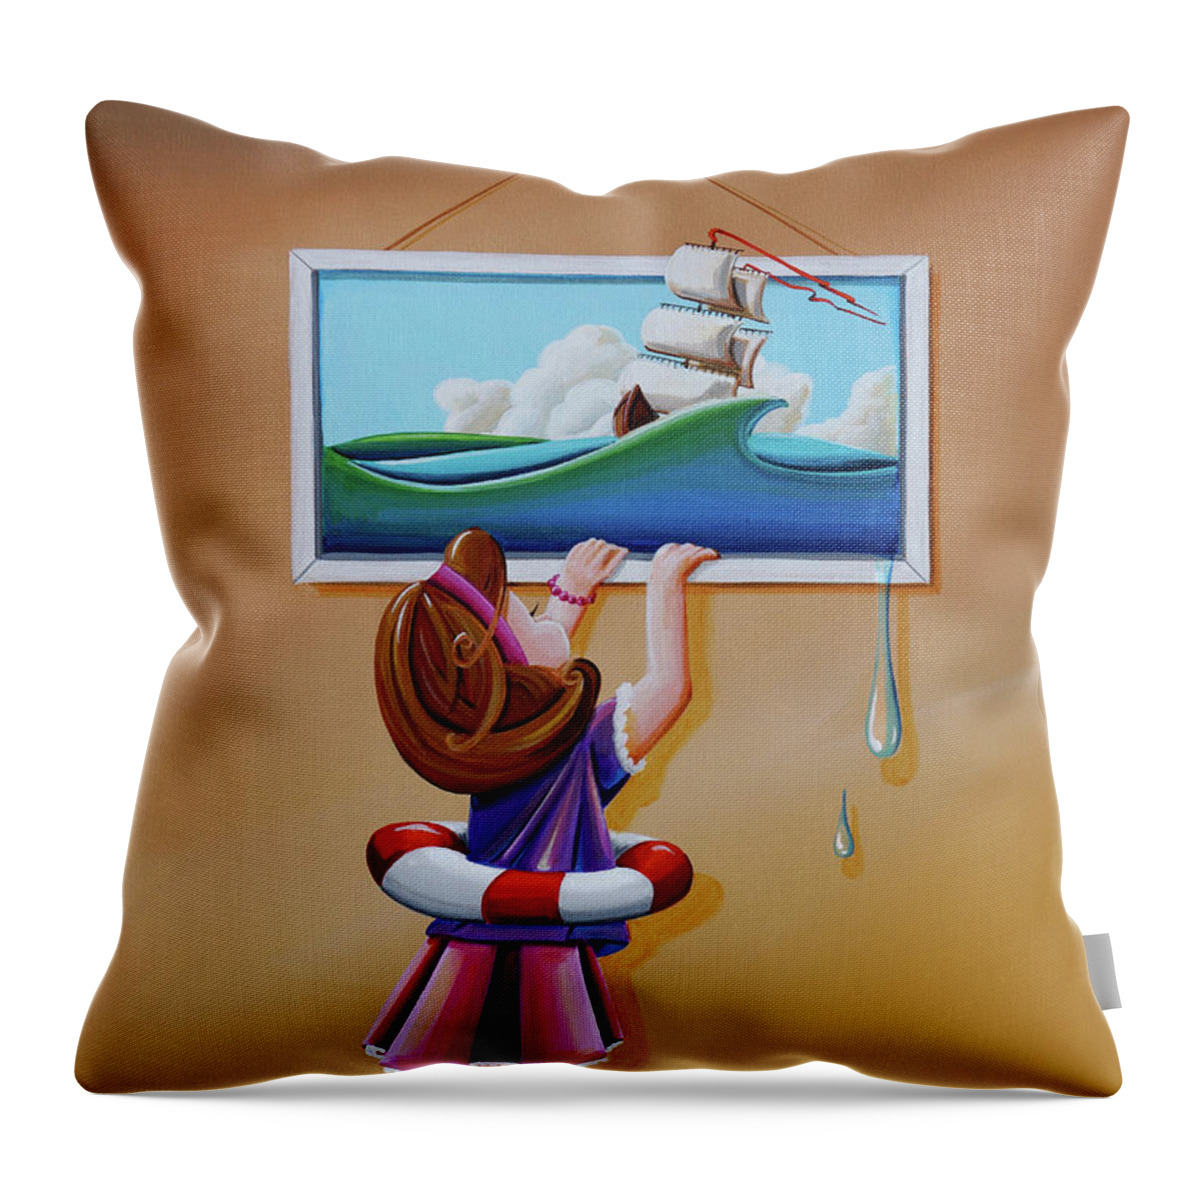 Ship Throw Pillow featuring the painting Take Me With You by Cindy Thornton